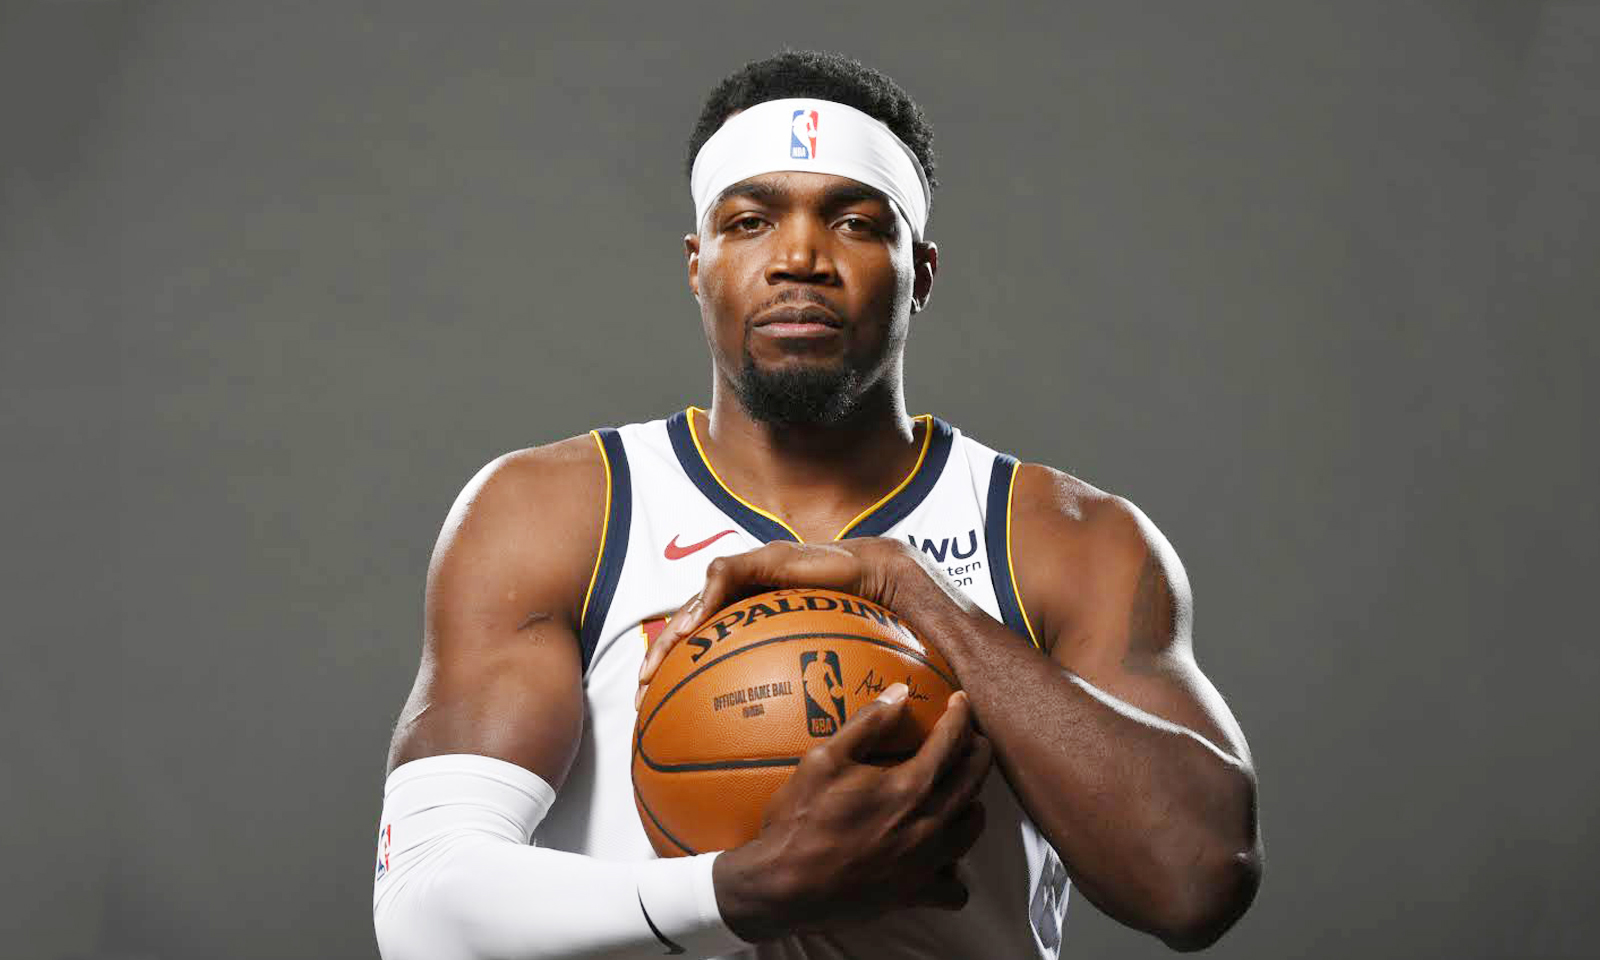 Paul Millsap, a former NBA All-Star, will pioneer Fellowship with diverse youth in the Georgia PGA Section and foundation